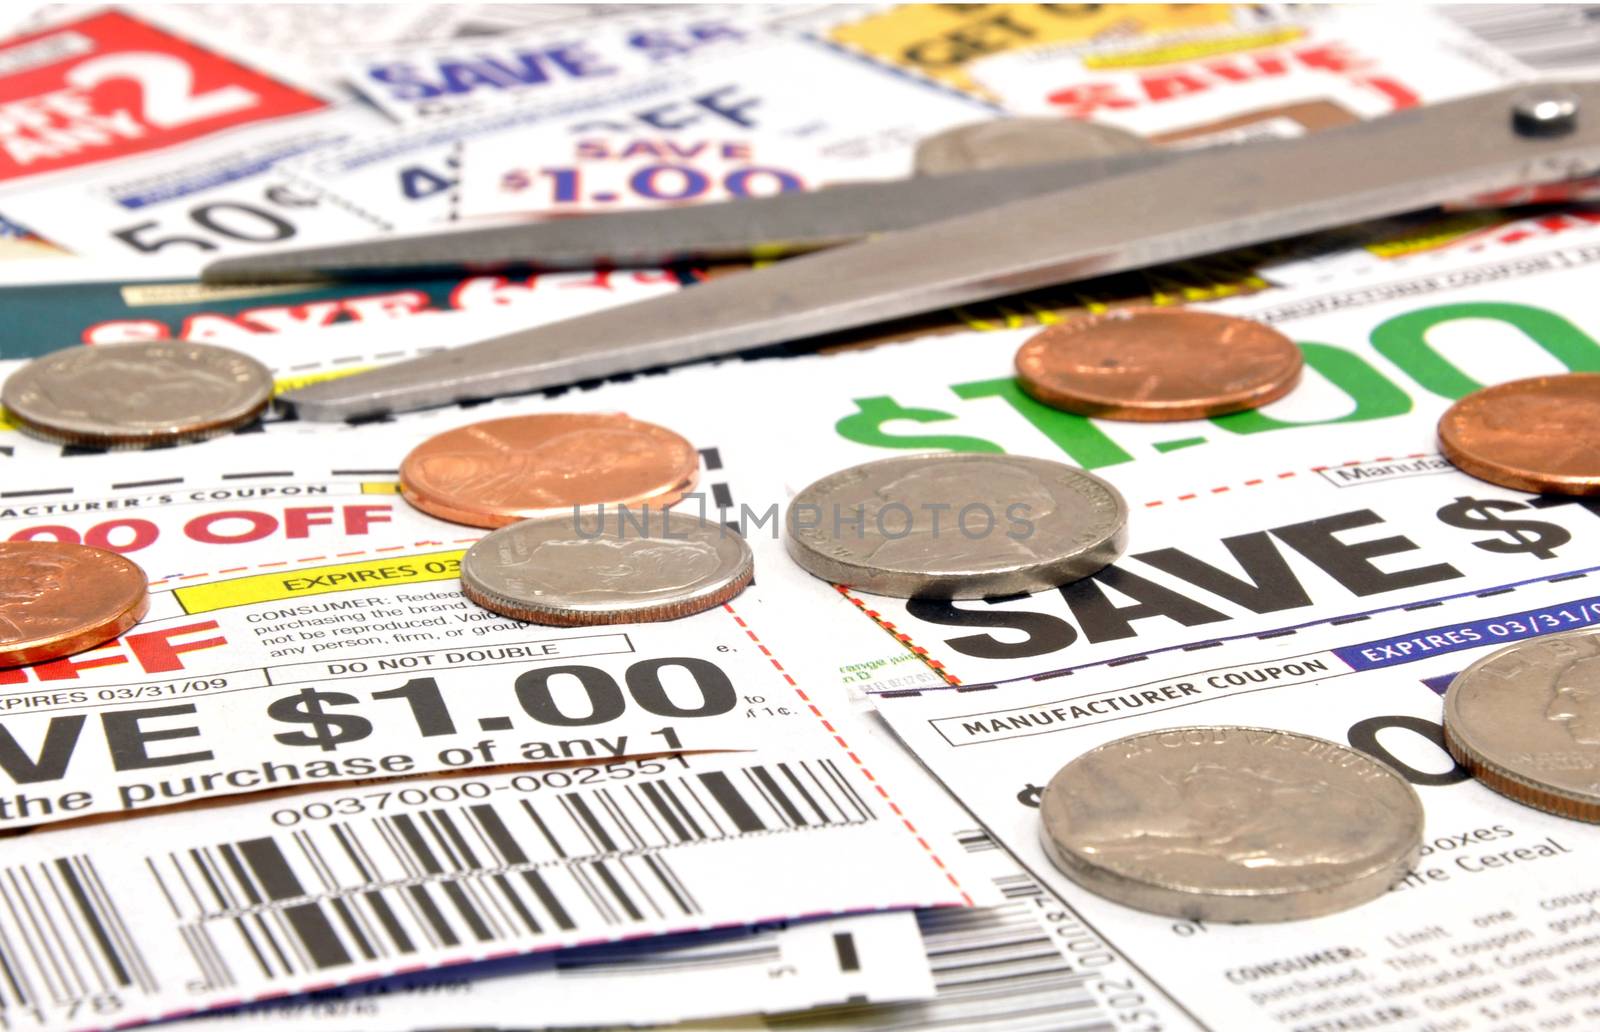 Colorful clipped grocery coupons